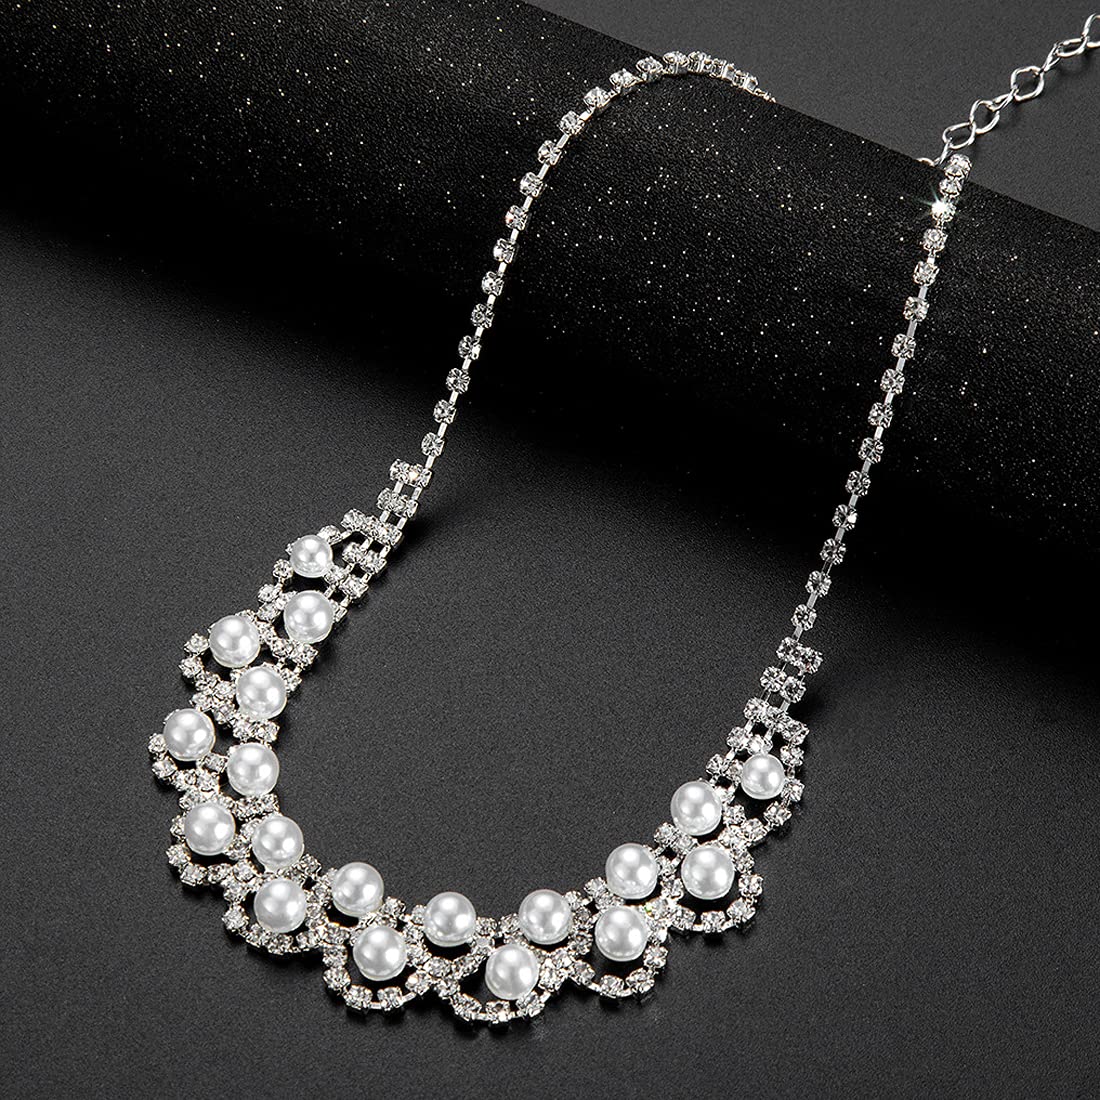 Yellow Chimes Elegant Latest Fashion A5 Grade Zircon Crystal Pearl Silver Choker Necklace Set for Women and Girls, White, Medium (Model: YCFJNS-361PRLCL-SL)